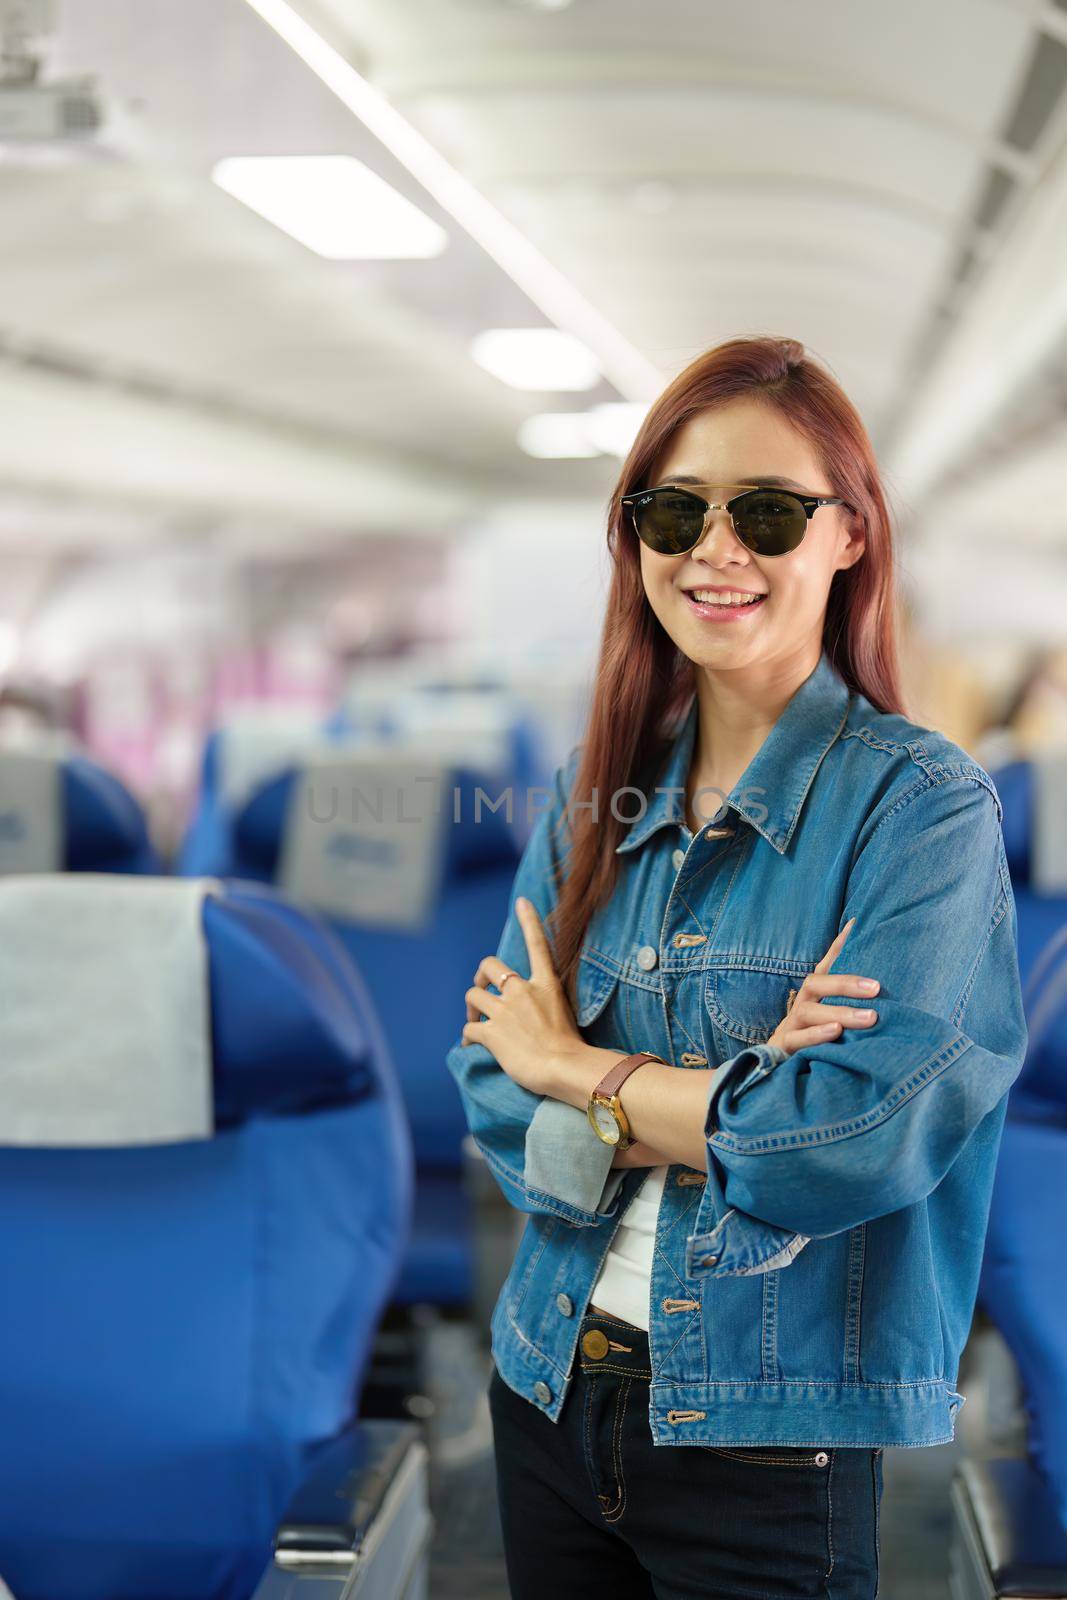 Portrait of an Asian woman taking a selfie or capturing memories while waiting for an economy class flight. Travel concept, vacations, tourism by Manastrong